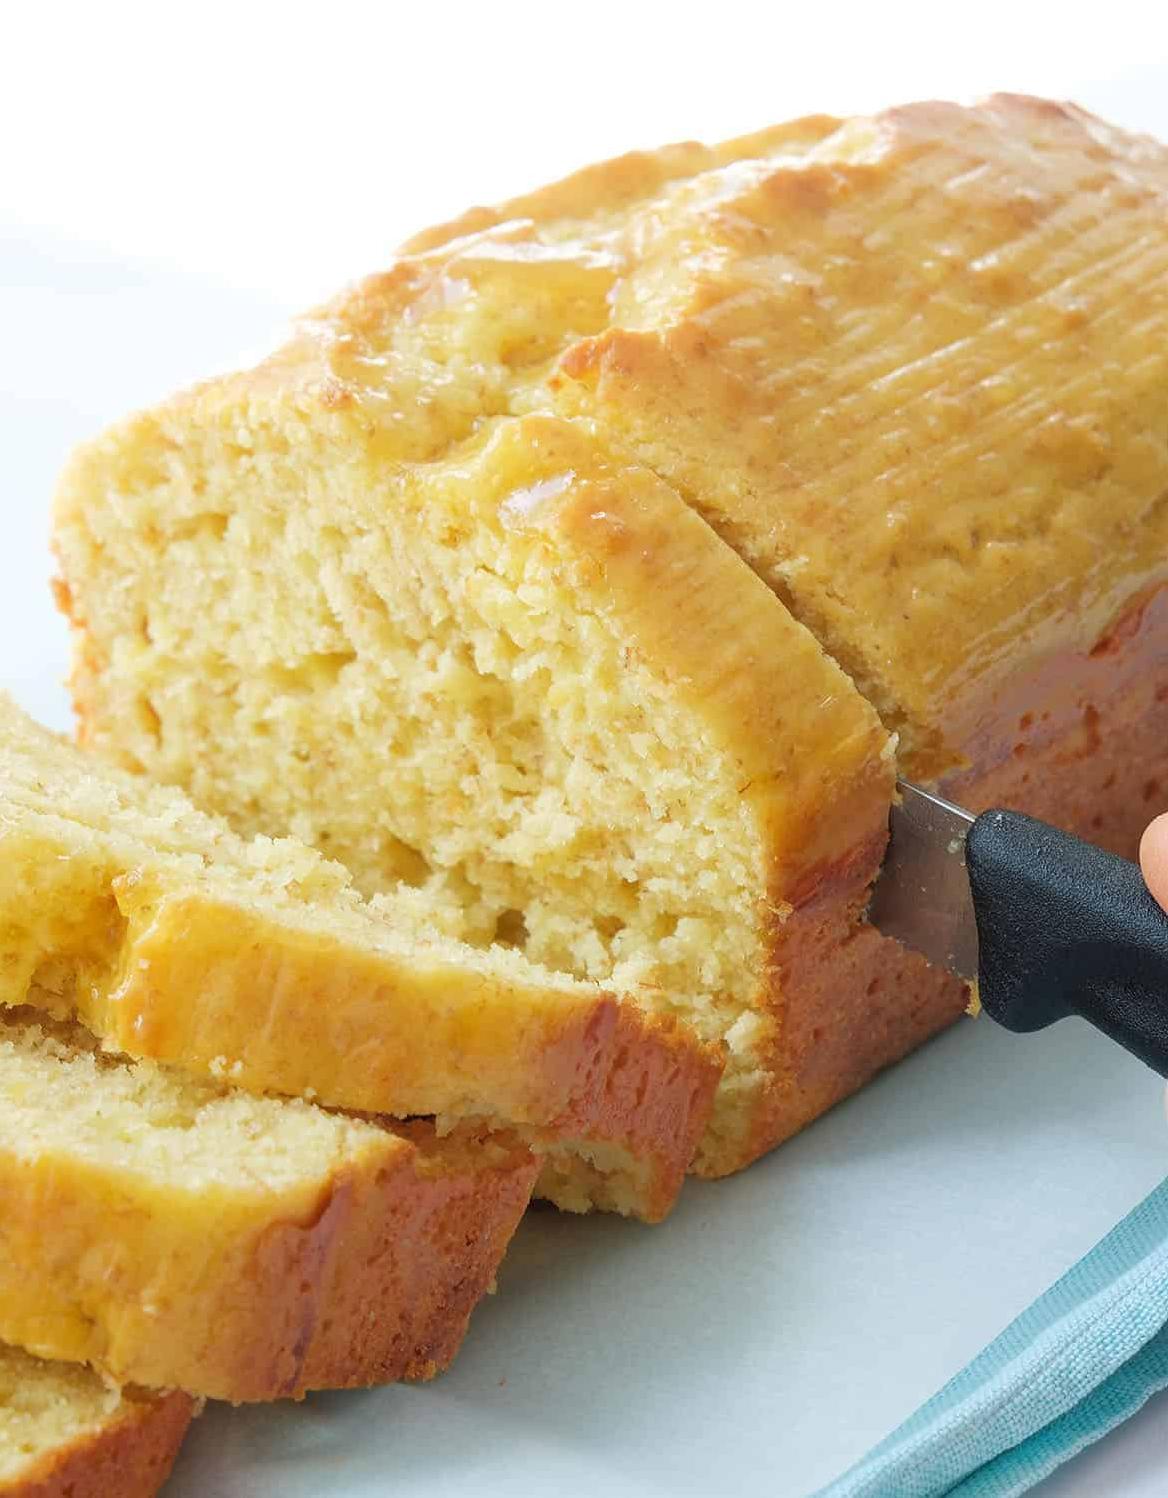  Yogurt lovers, unite! This pound cake recipe is perfect for you.